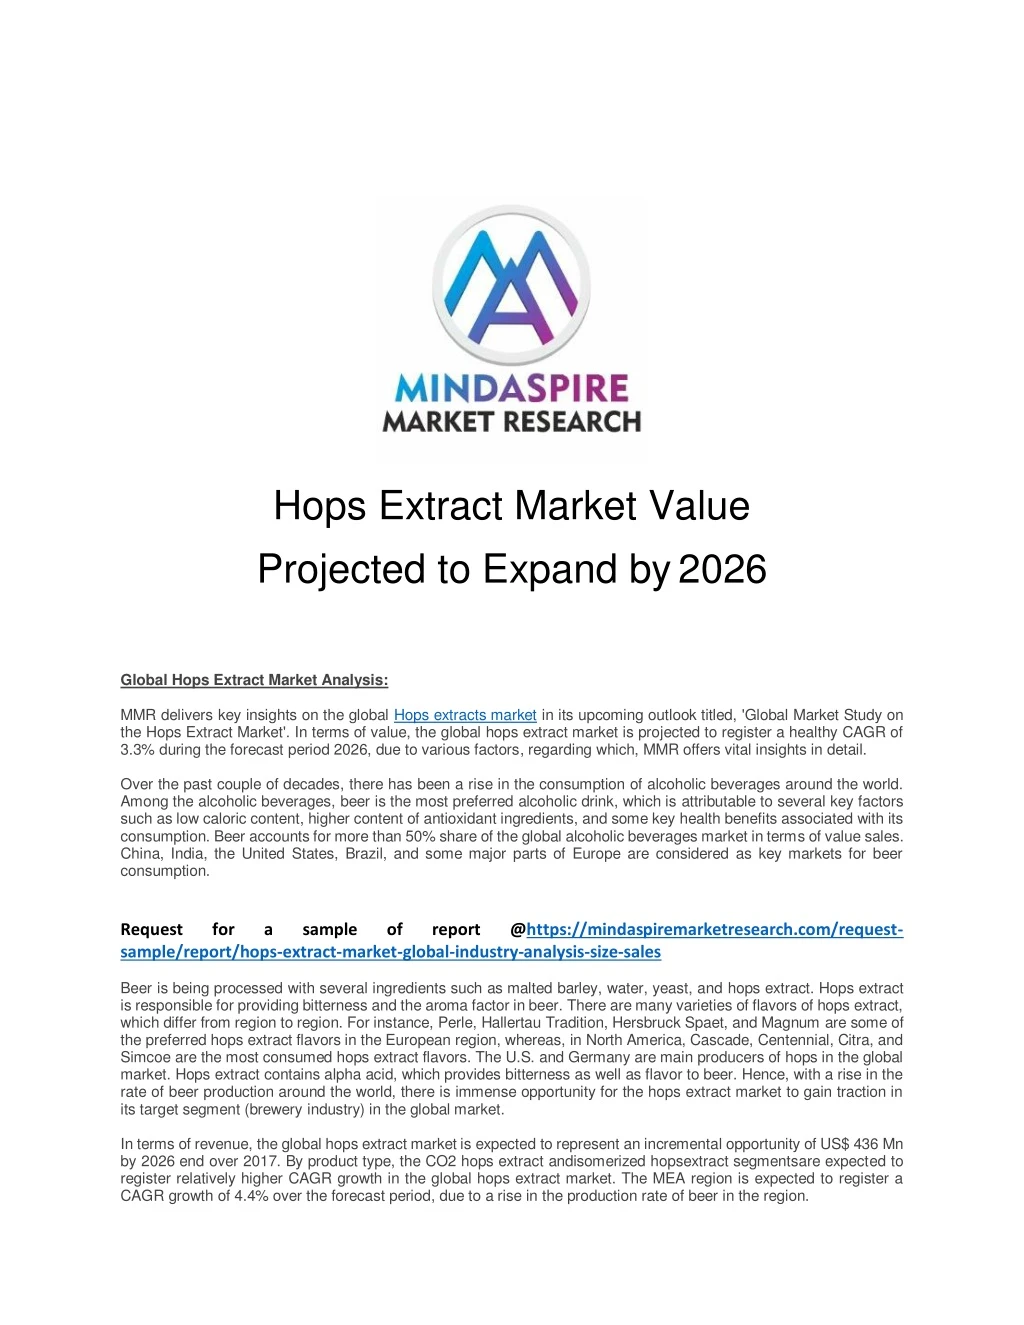 hops extract market value projected to expand